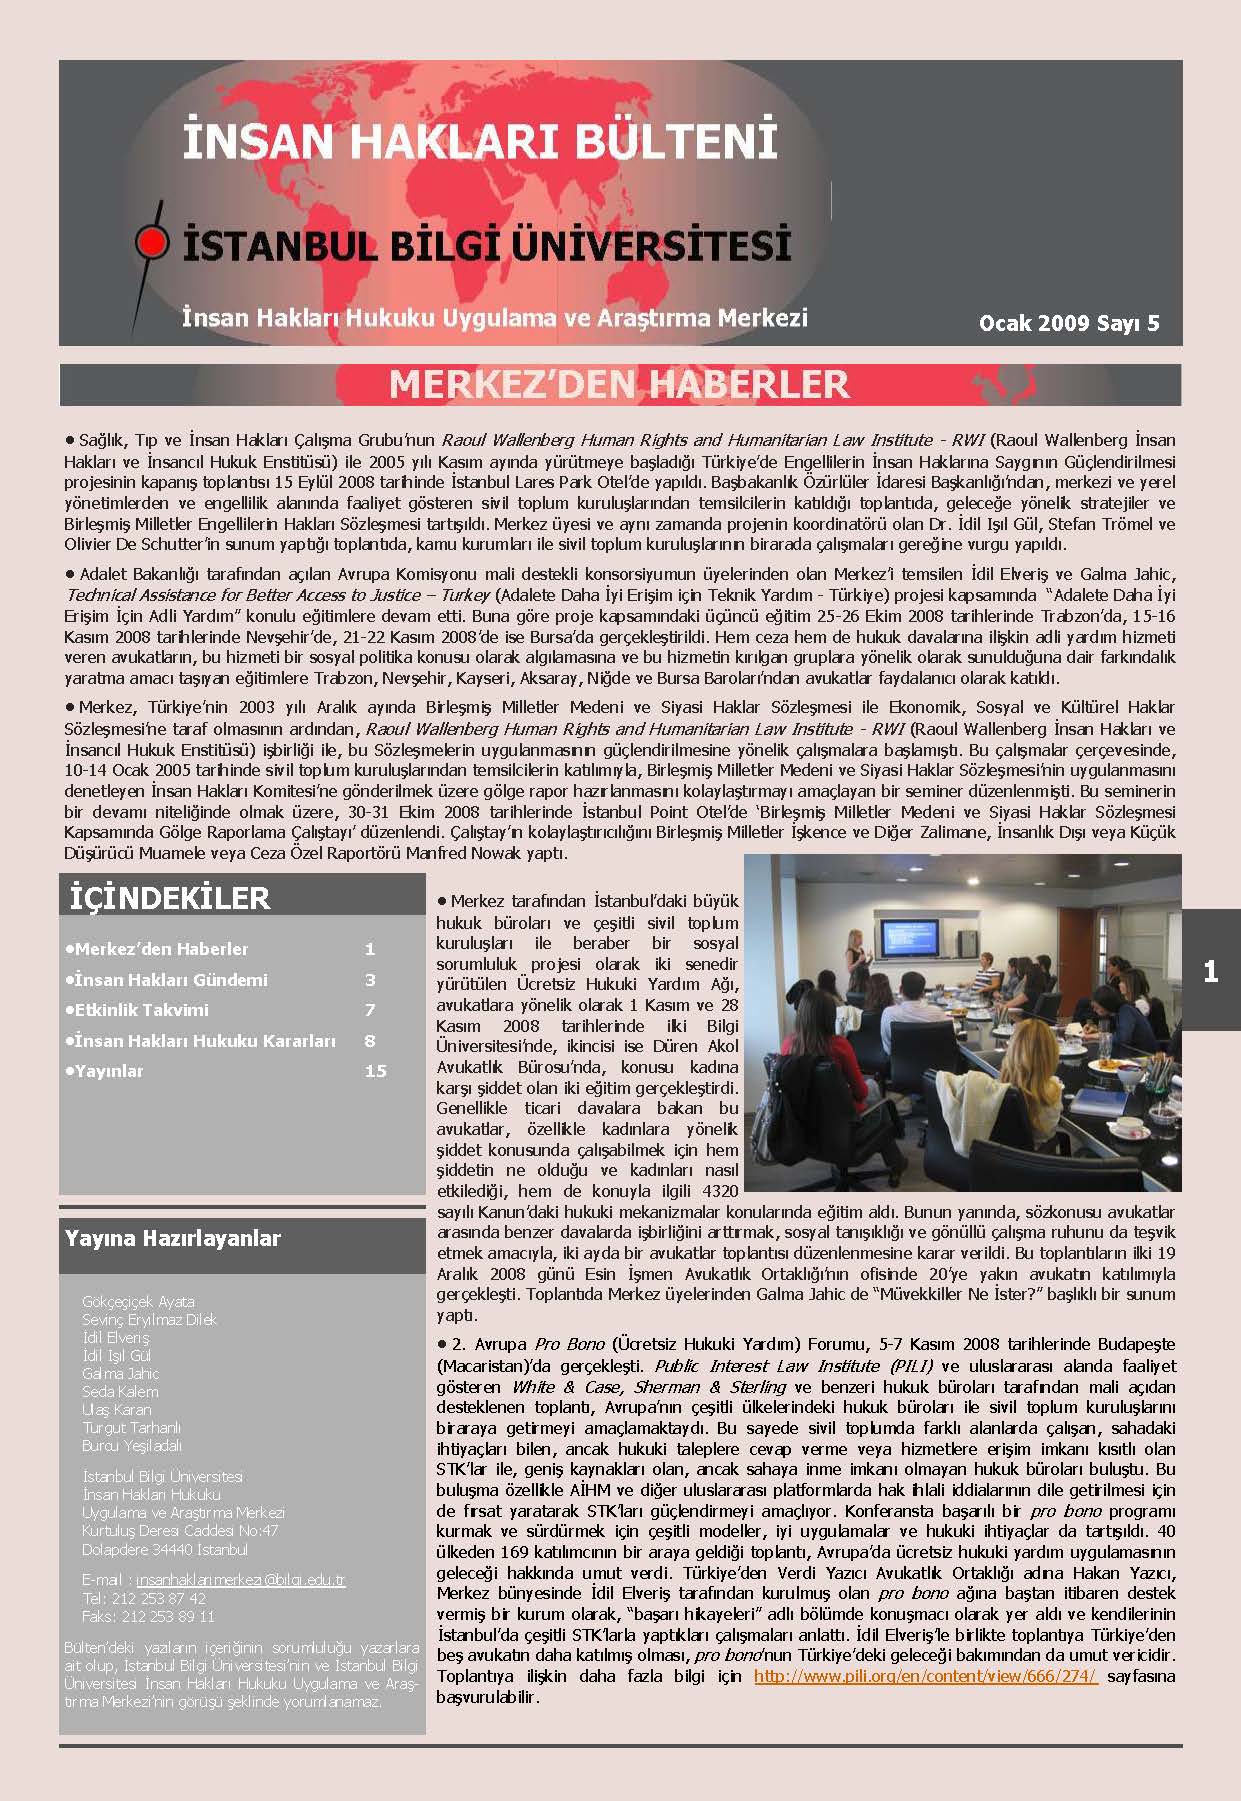 Human Rights Bulletin, January 2009, Issue 5